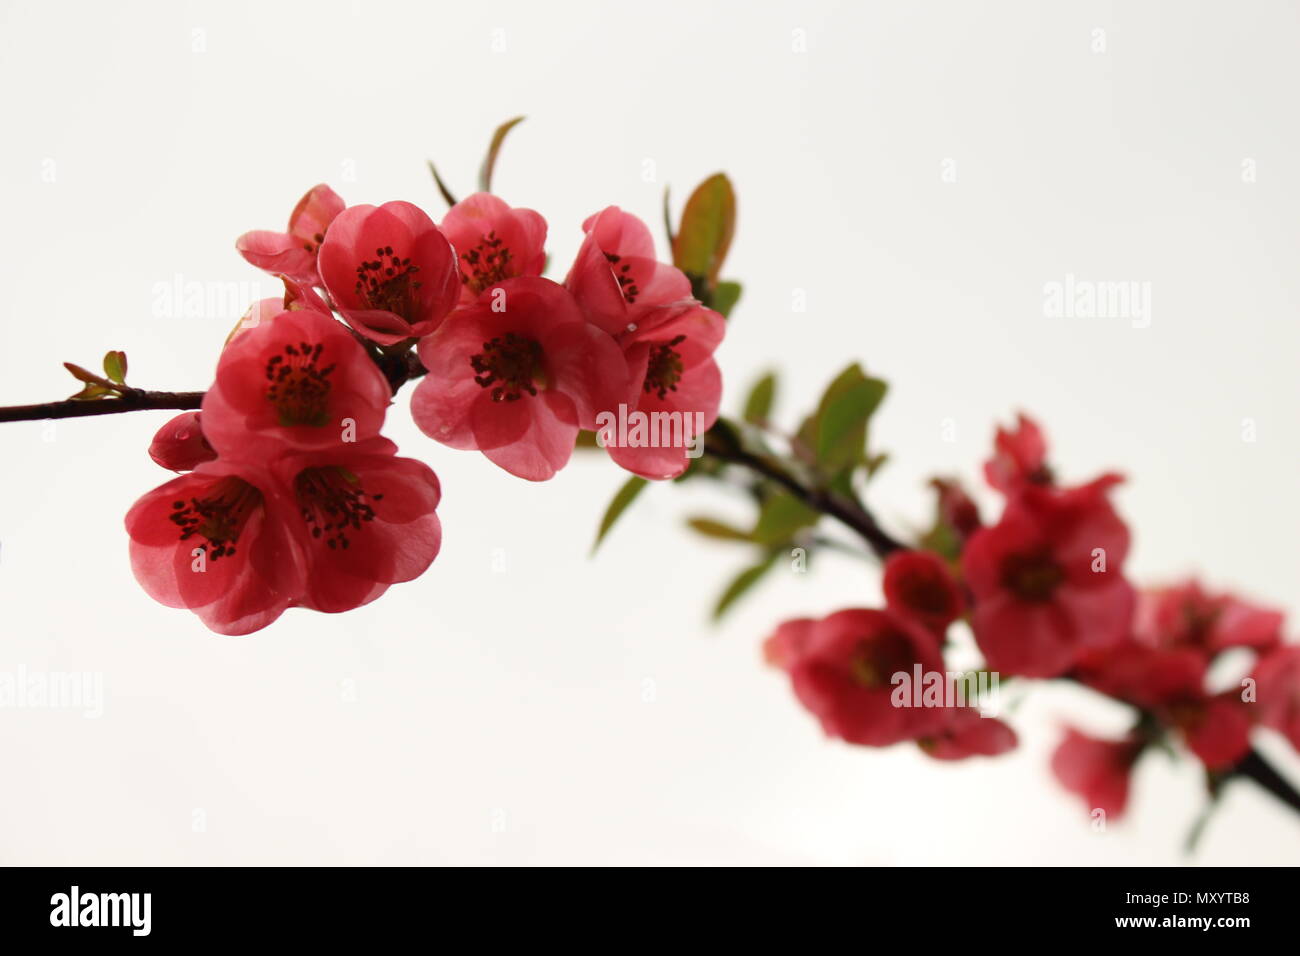 Branch with flowers of japanese quince / Chaenomeles japonica Stock Photo